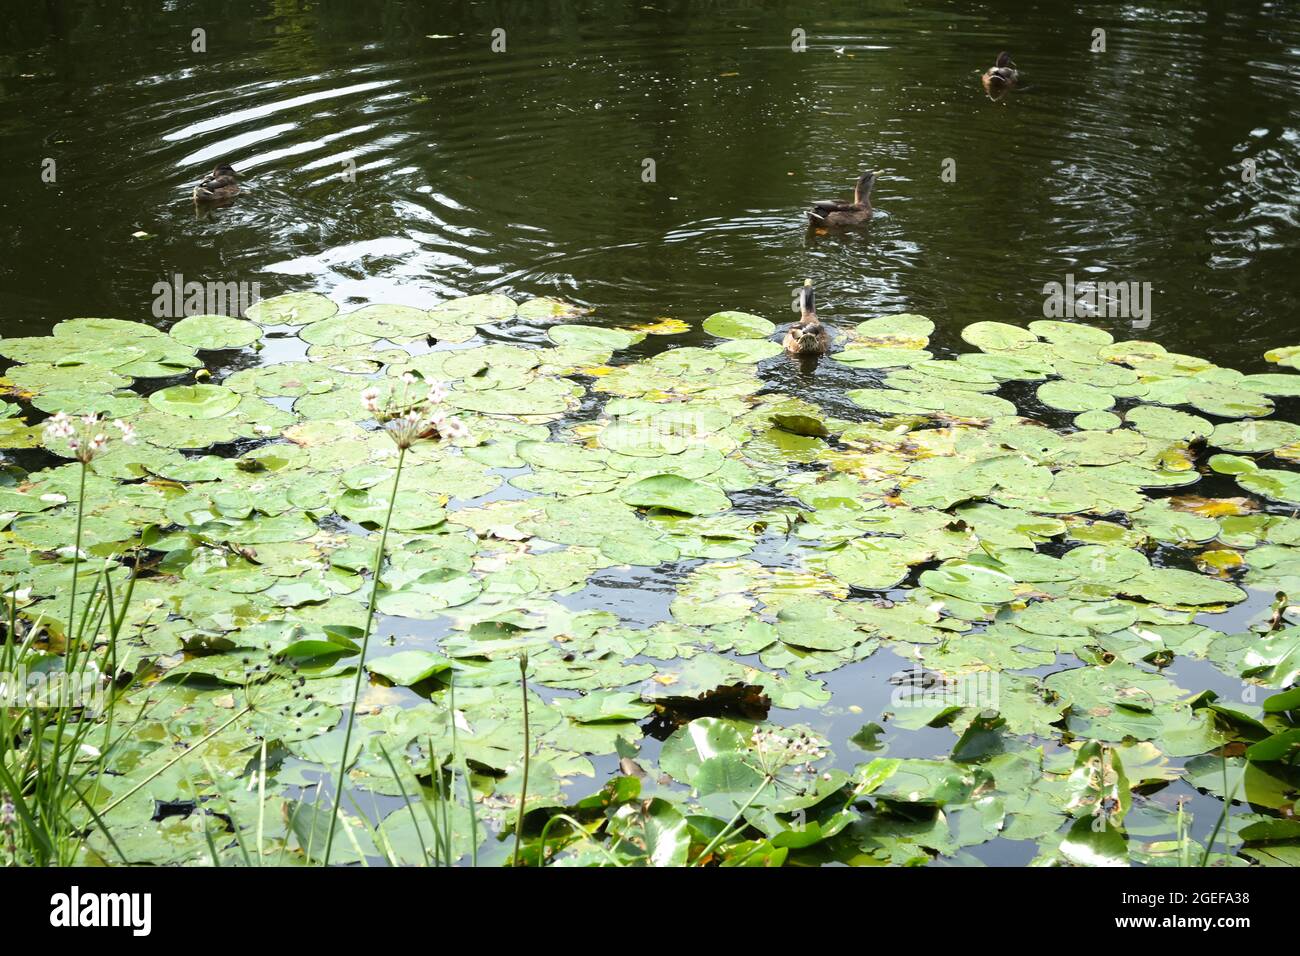 Beautiful shot of ducks and Emergent plants in a lake Stock Photo